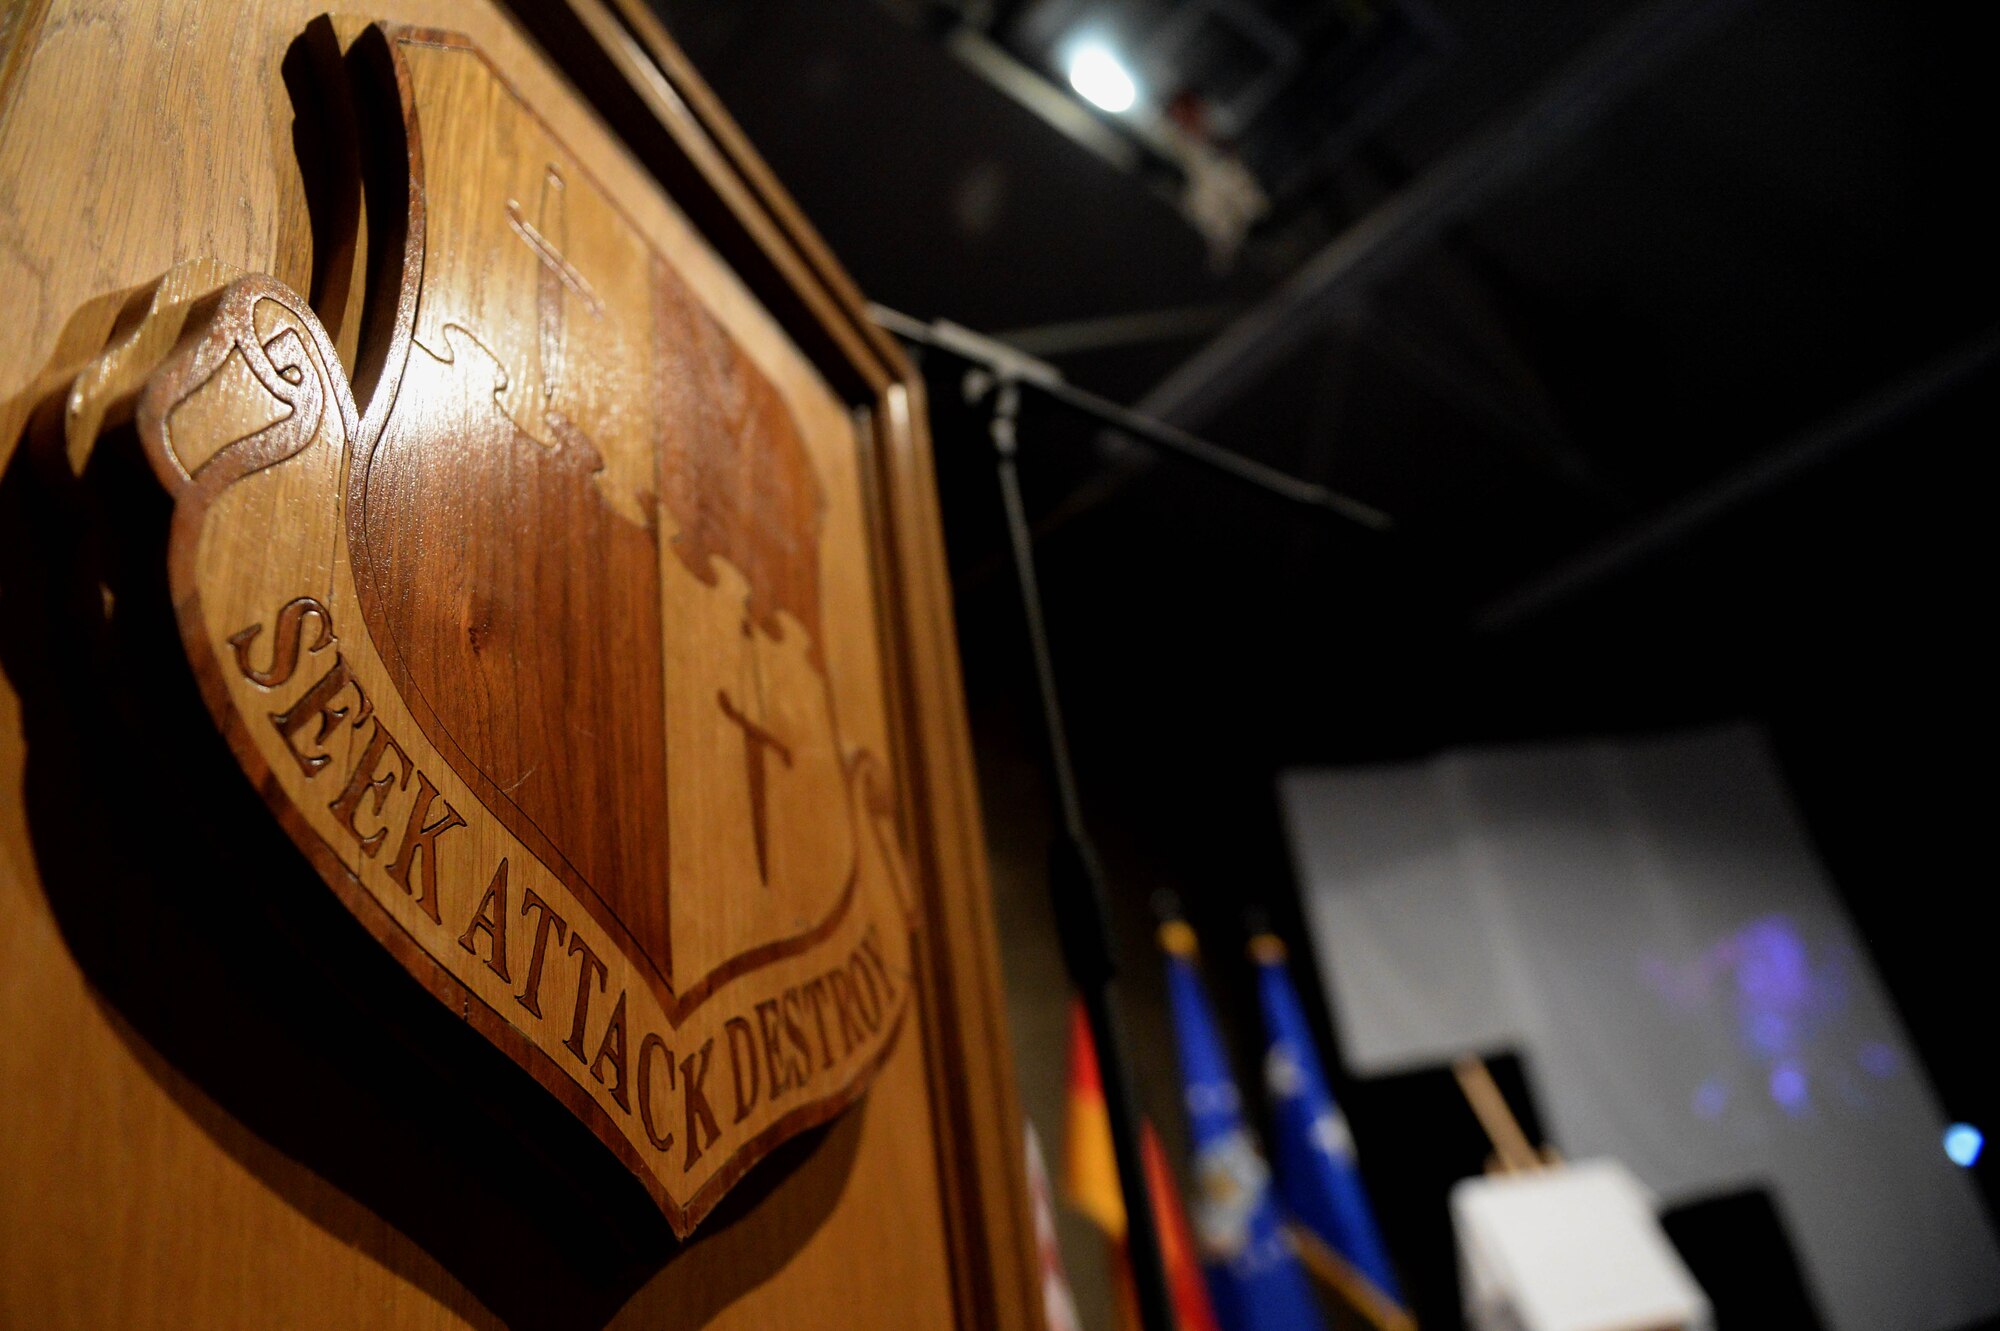 The 52nd Fighter Wing shield is displayed on a podium during the 52 FW 2014 Annual Awards Banquet at the Skelton Memorial Fitness Center at Spangdahlem Air Base, Germany, Feb. 7, 2015. Nominees were recognized for their work and performance at the 2014 Annual Awards. (U.S. Air Force photo by Airman 1st Class Timothy Kim/Released)